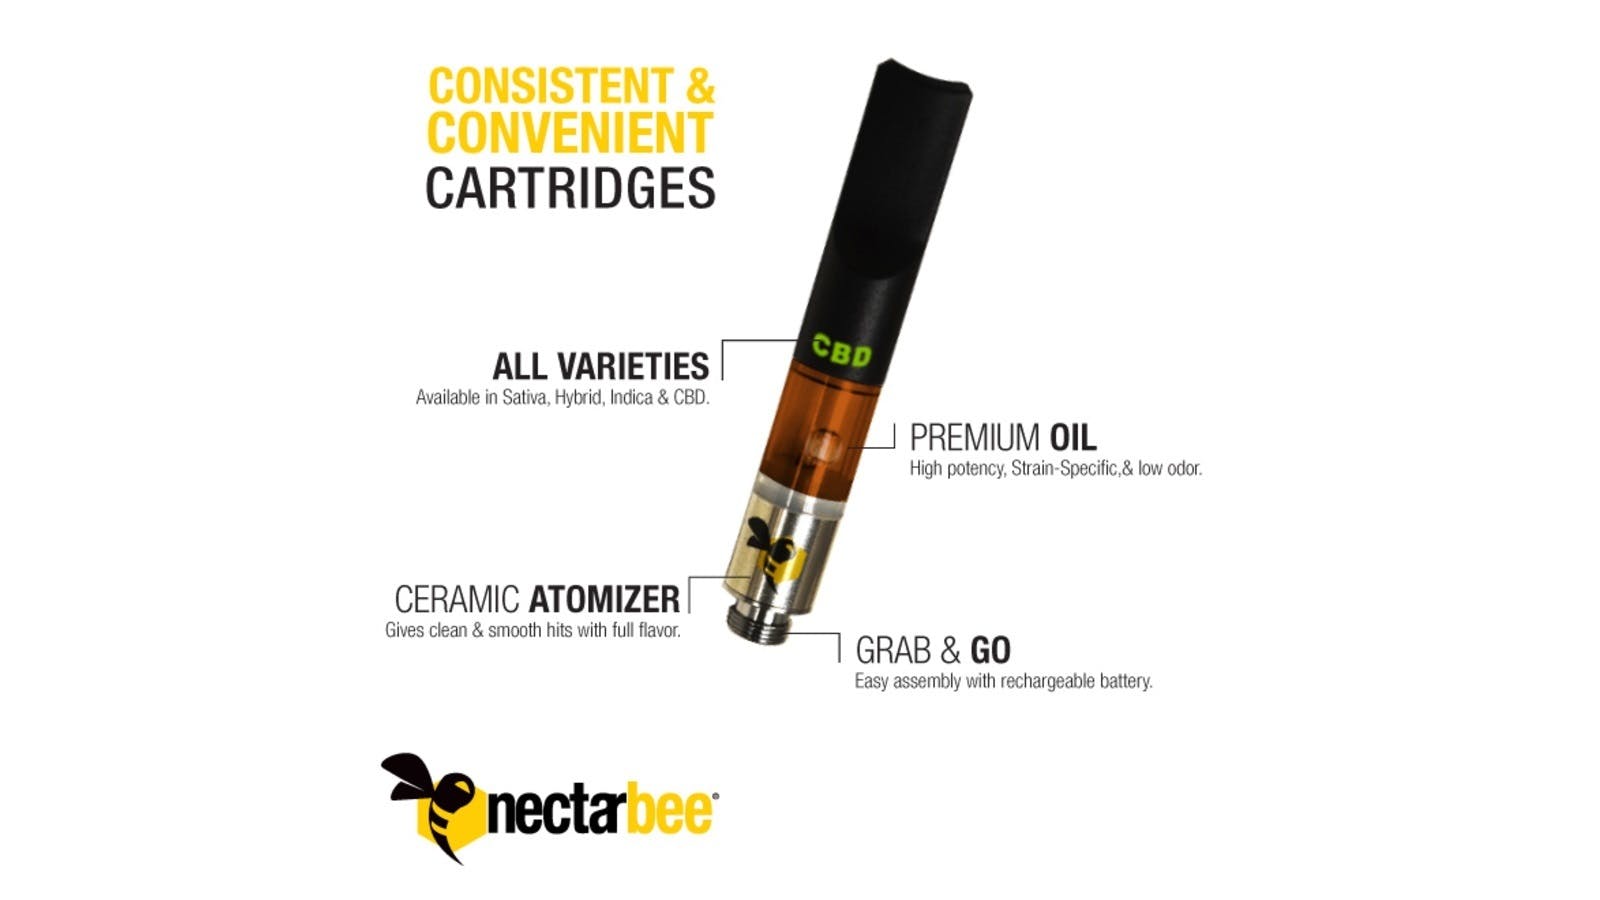 marijuana-dispensaries-the-green-solution-union-station-in-denver-nectarbee-pure-oil-cartridge